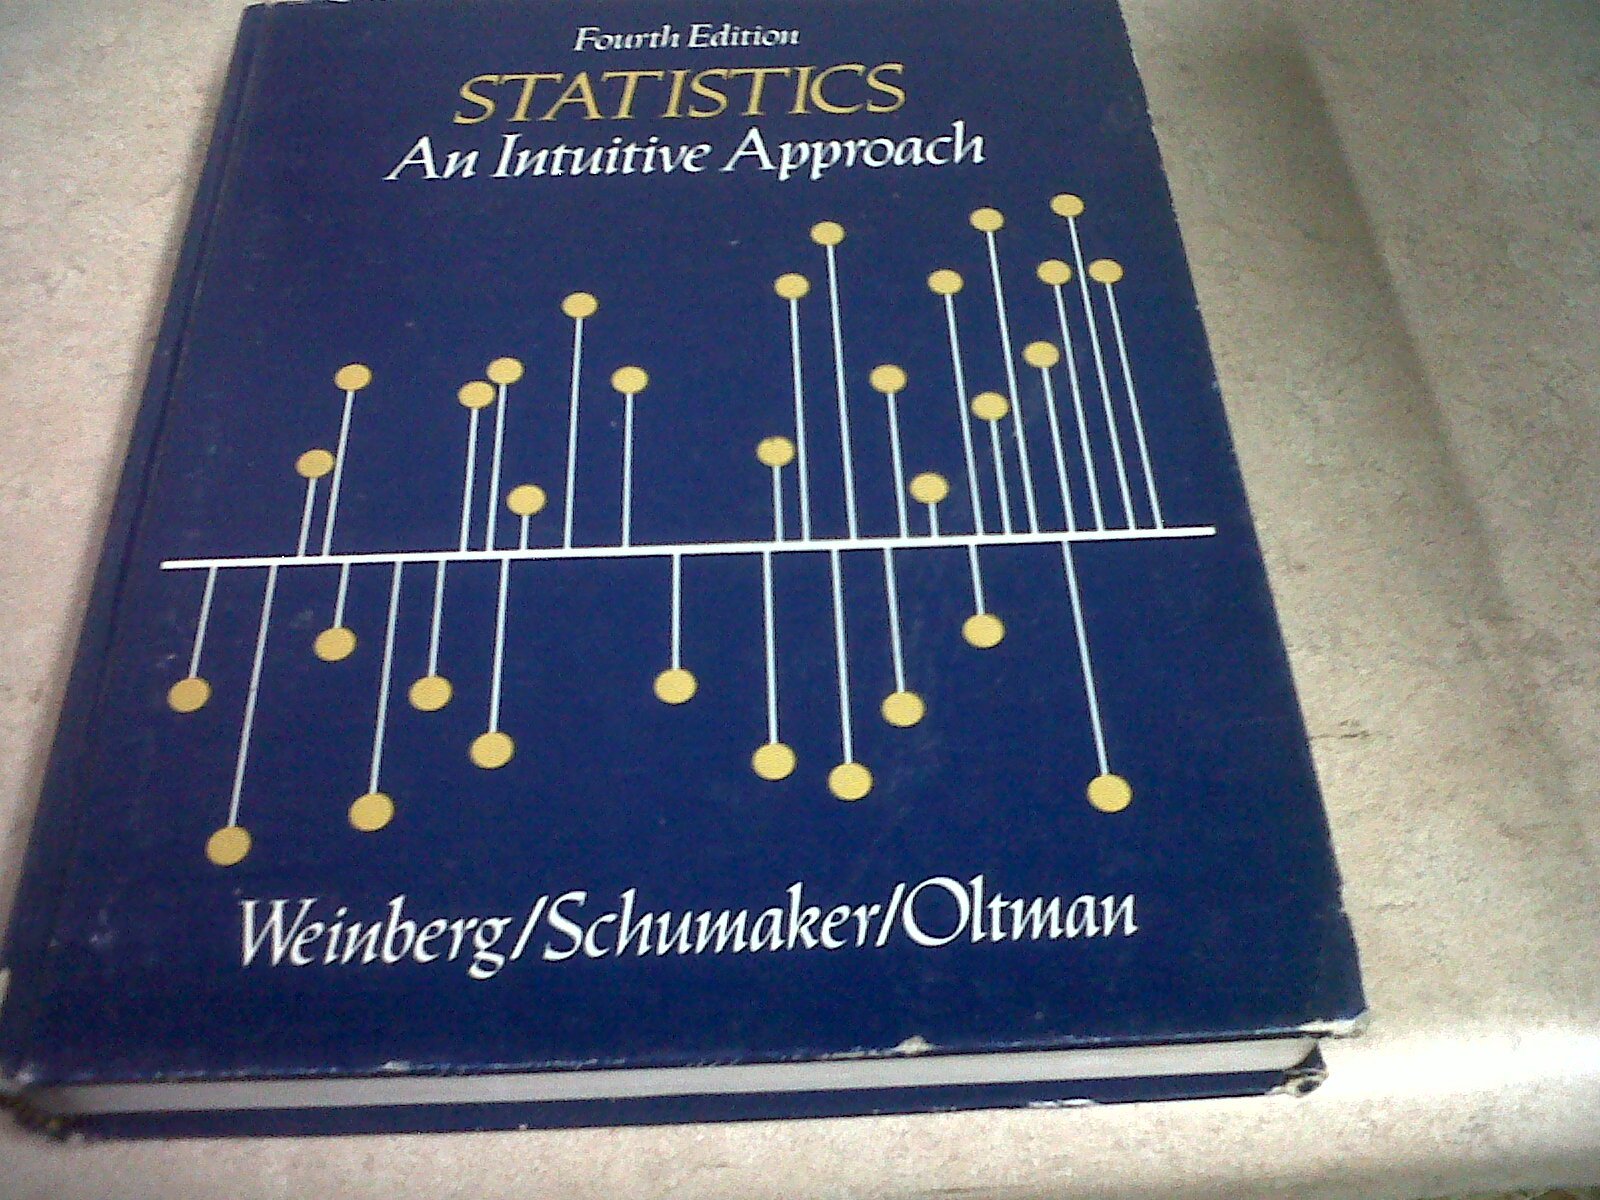 Statistics: An Intuitive Approach. Belmont, California: Brook's/Cole, fourth printing, 1981.